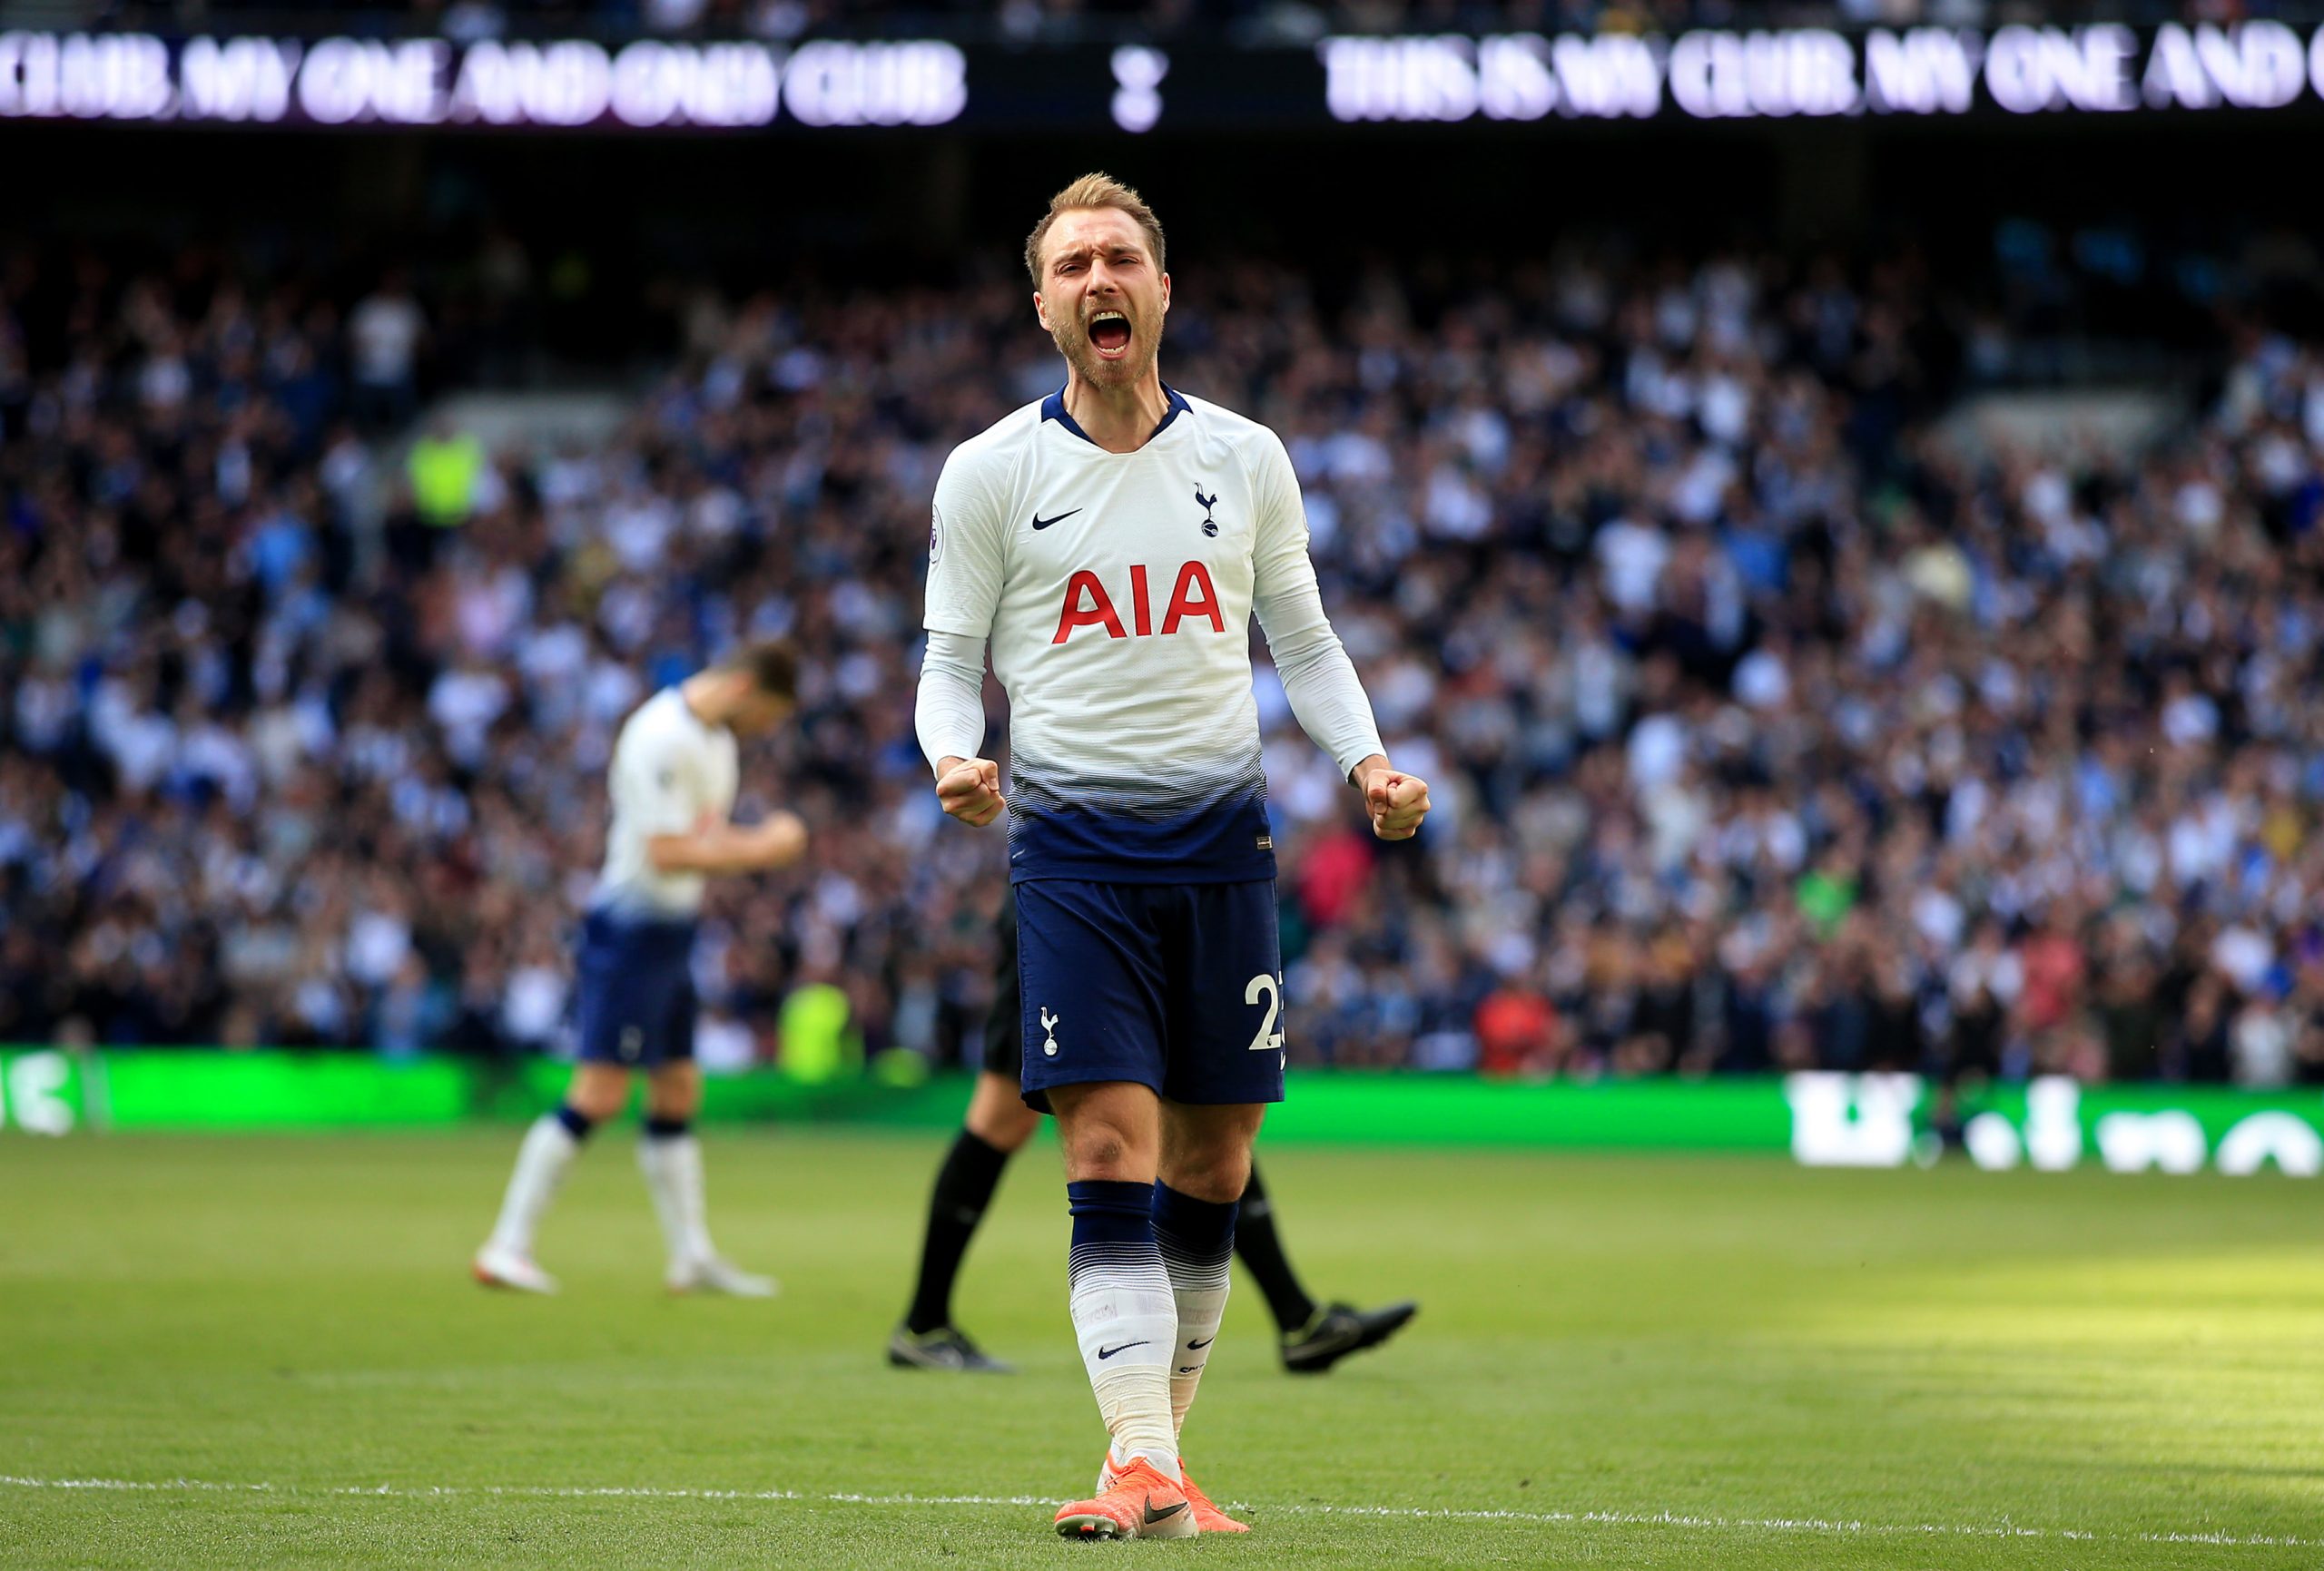 LONDON, ENGLAND - MAY 12: Christian Eriksen of Tottenham Hotspur celebrates after scoring his team's second goal during the Premier League match between Tottenham Hotspur and Everton FC at Tottenham Hotspur Stadium on May 12, 2019 in London, United Kingdom. (Photo by Marc Atkins/Getty Images)